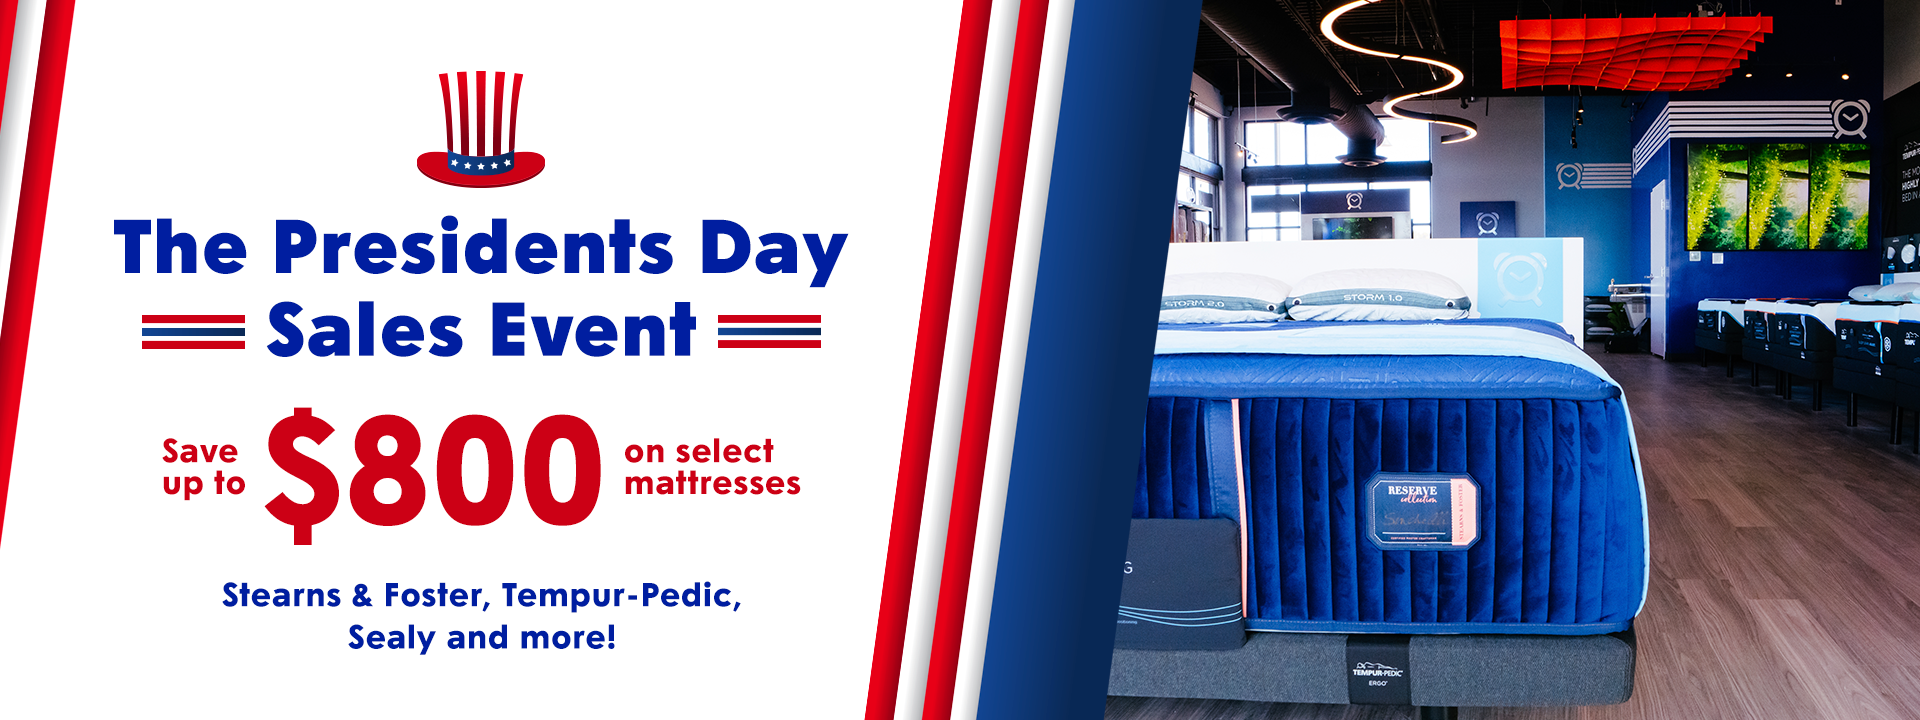 The Presidents Day Sales Event